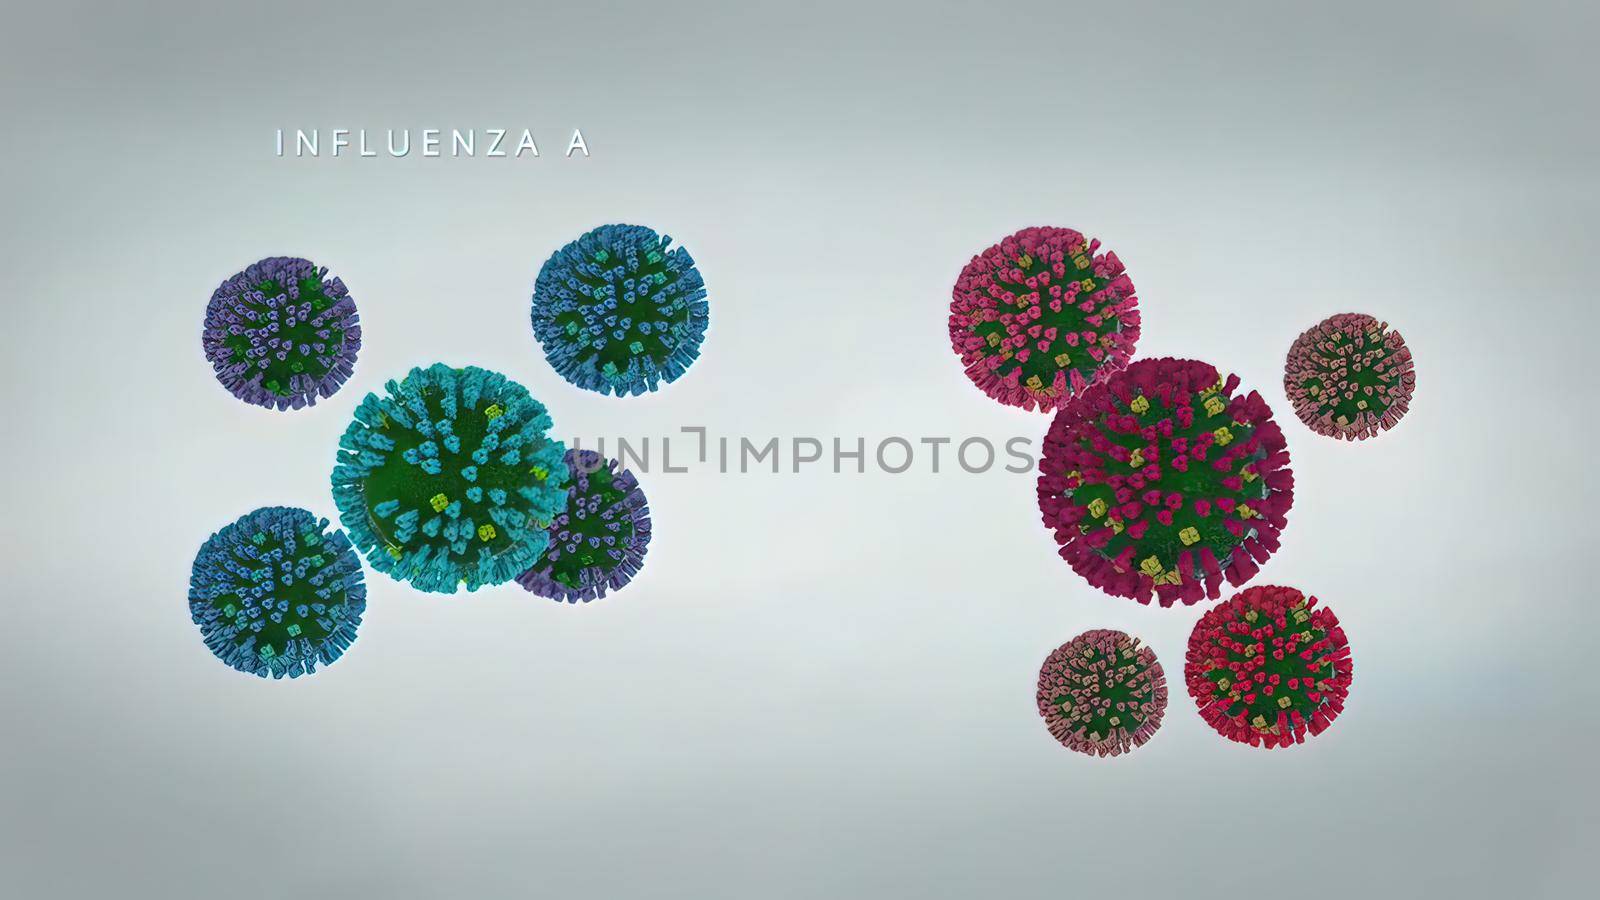 Influenza A and B viruses are influenza viruses that cause outbreaks in humans.3D illustration